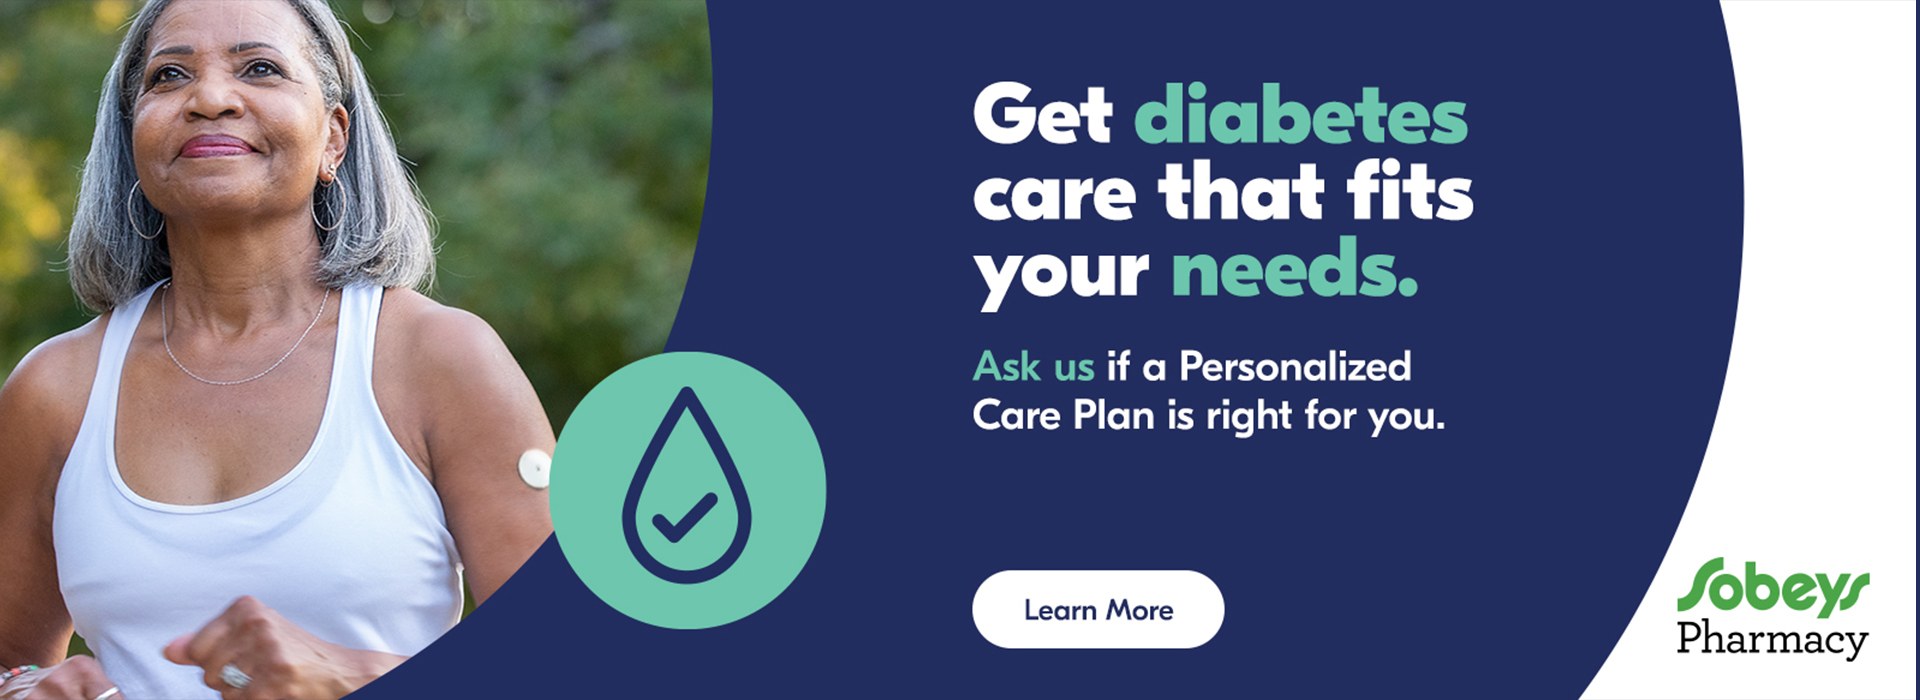 Text Reading 'Get diabetes care that fits your needs. Ask us if a Personalized Care Plan is right for you. 'Learn More' by clicking on the button below.'